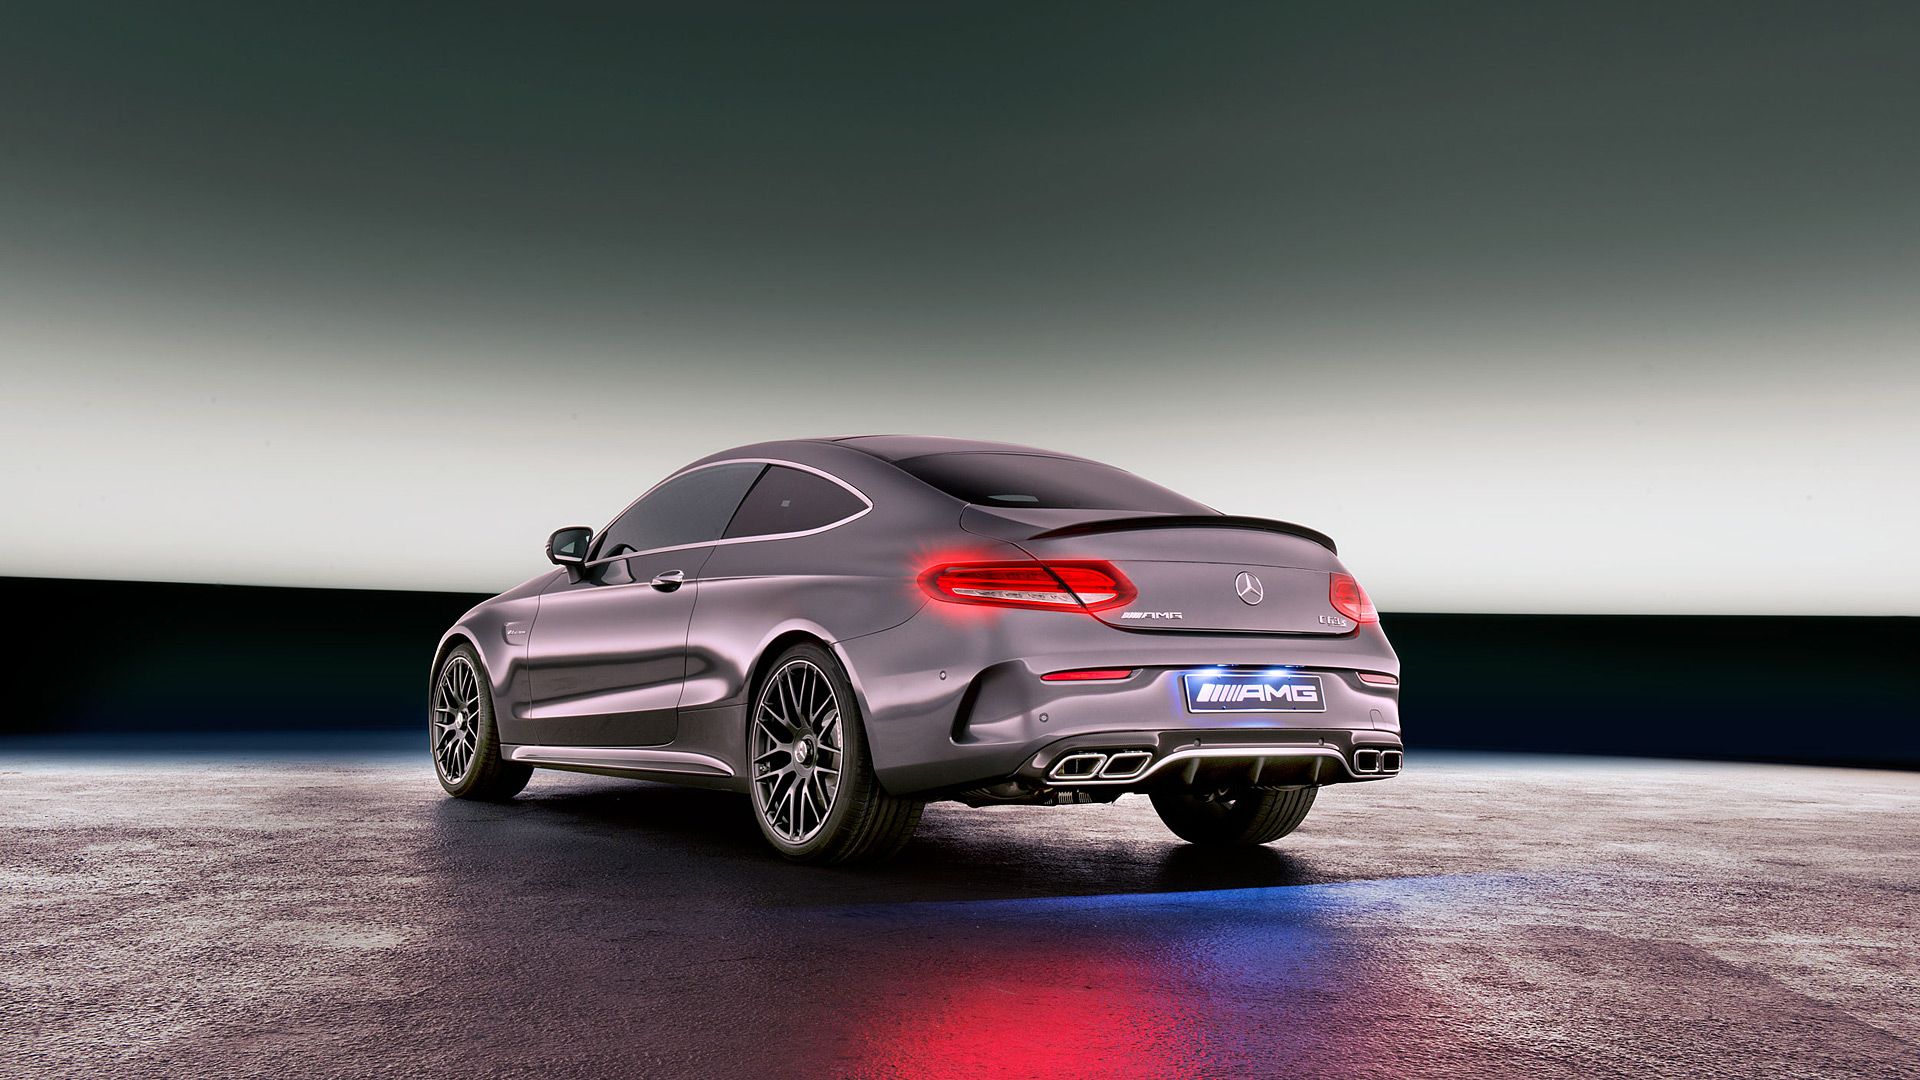 Free Download 2017 Mercedes Benz C63 AMG Coupe Wallpaper Unusual [1920x1080] For Your Desktop, Mobile & Tablet. Explore Mercedes AMG C63 Wallpaper. Mercedes AMG C63 Wallpaper, Mercedes AMG C63 S Coupe Wallpaper